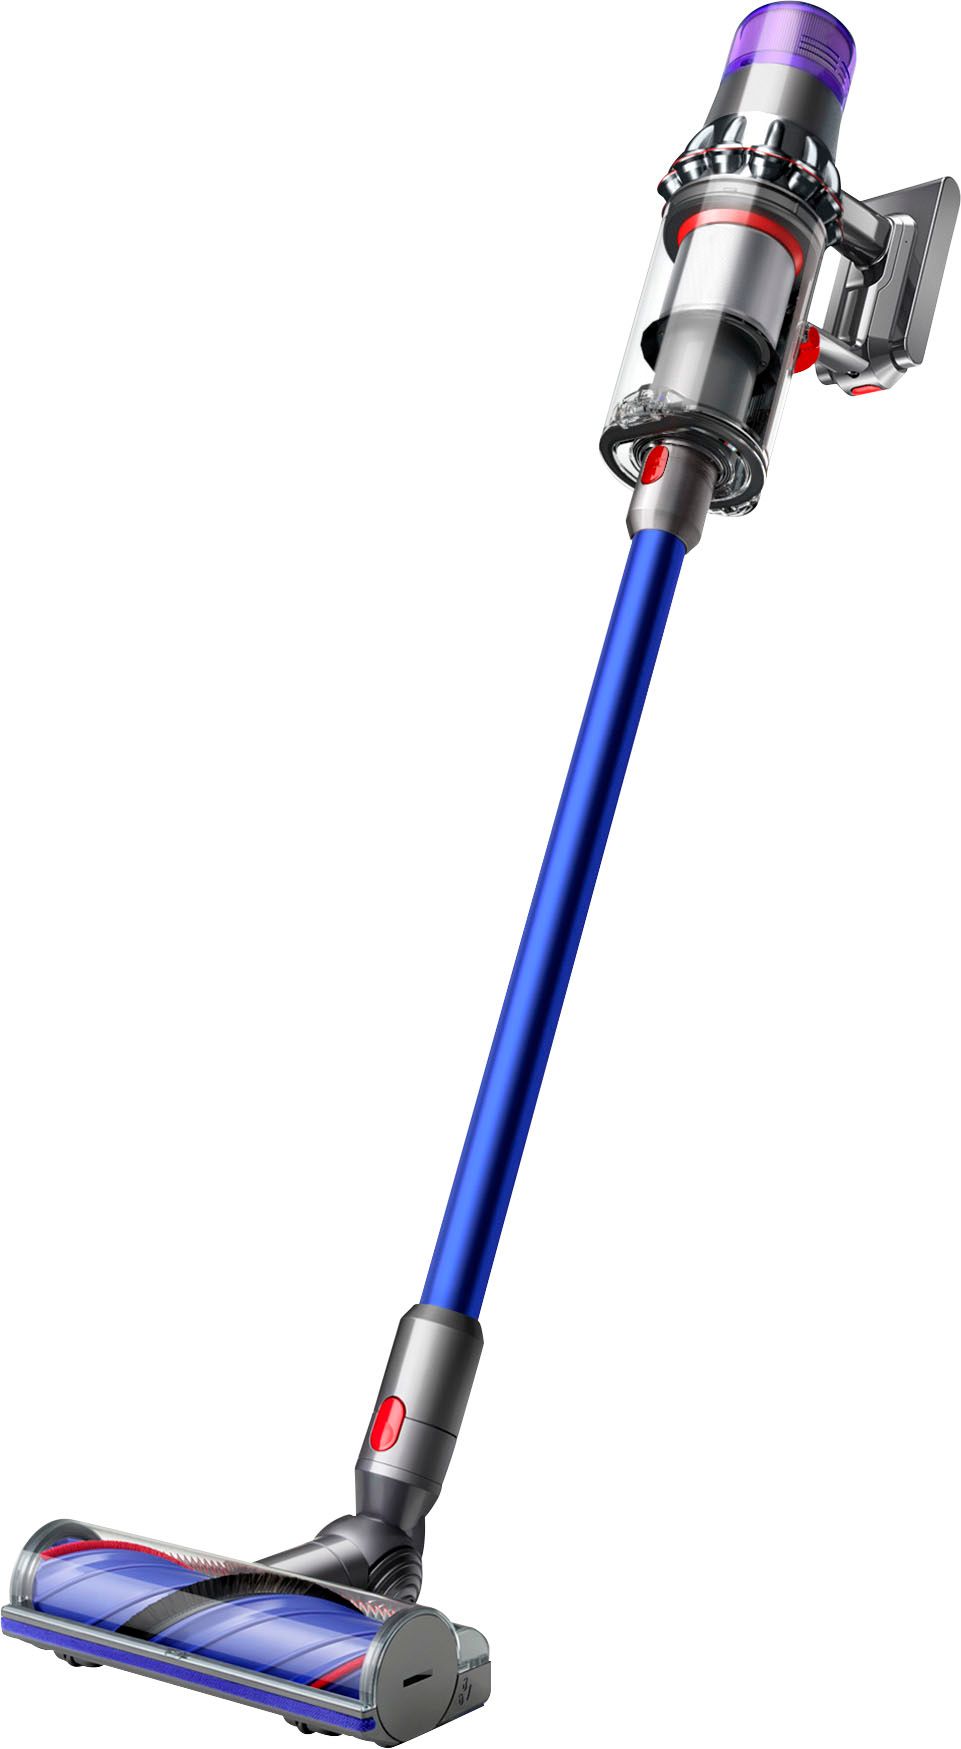 Dyson V11 Cordless Vacuum with 6 accessories Nickel/Blue 447921-01 - Best Buy | Best Buy U.S.